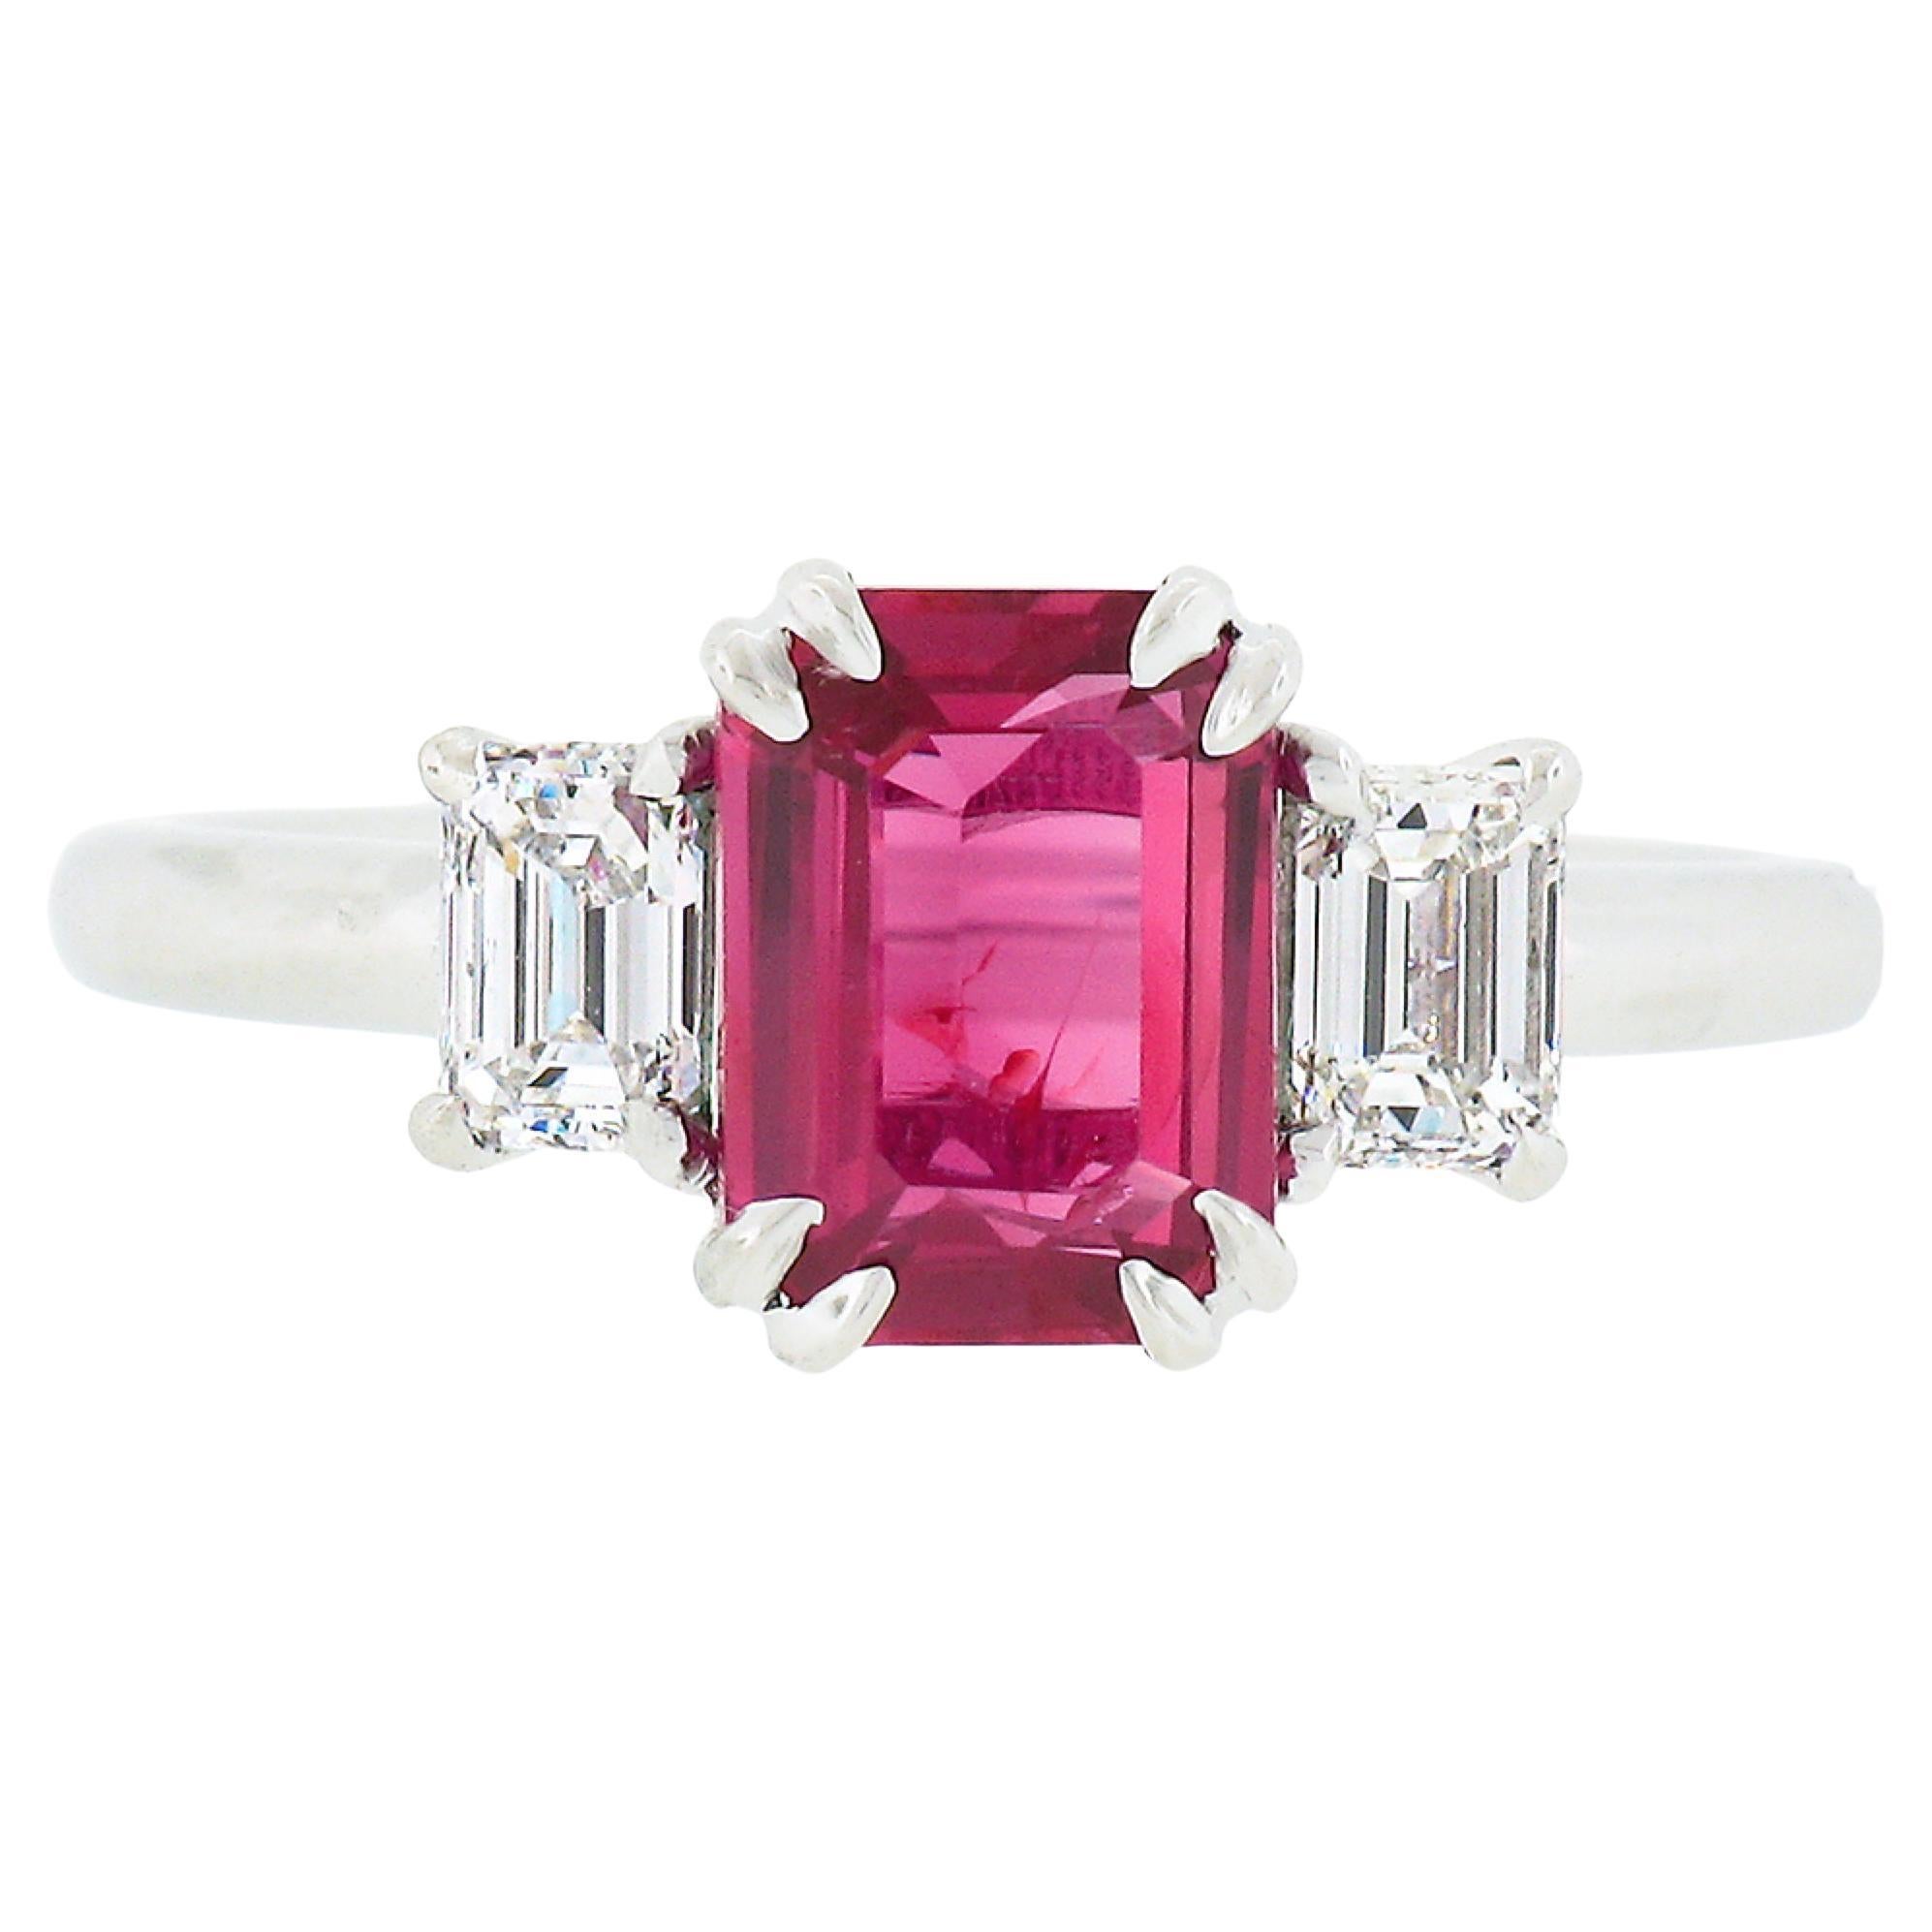 NEW Platinum 2.01ctw GIA NO HEAT Pink Sapphire & Diamond 3 Stone Engagement Ring For Sale